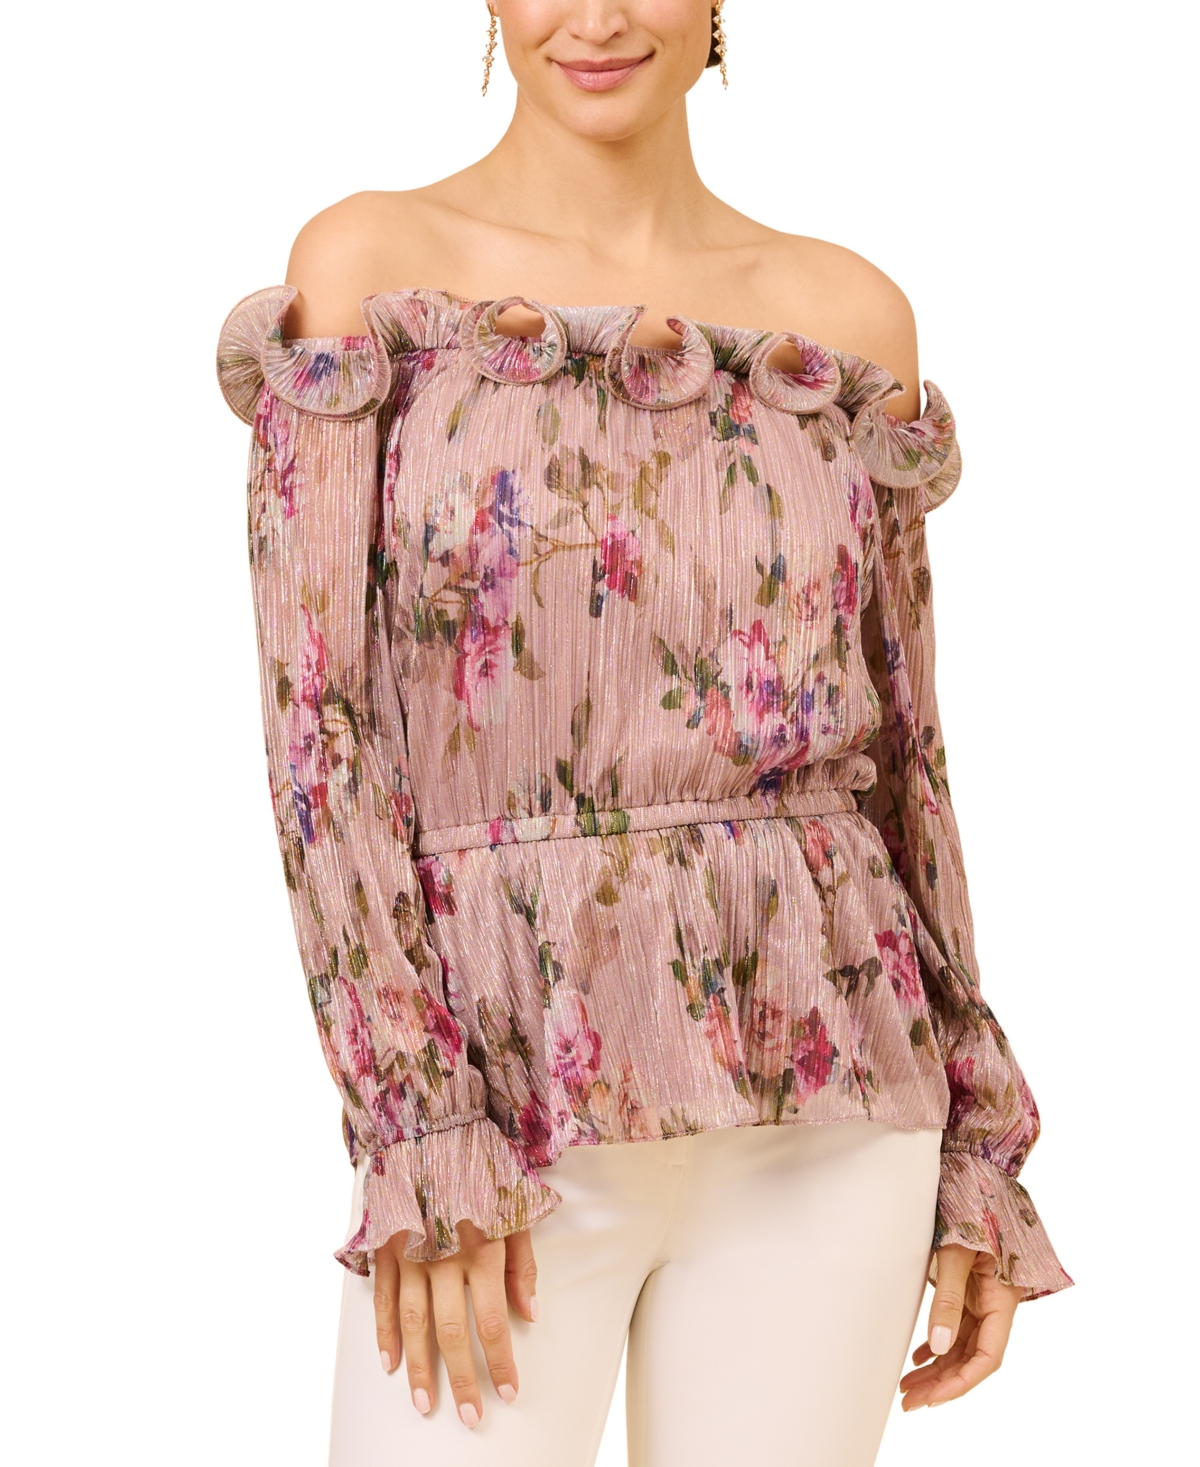  Adrianna Papell Women's Printed Ruffled Off-The-Shoulder Top